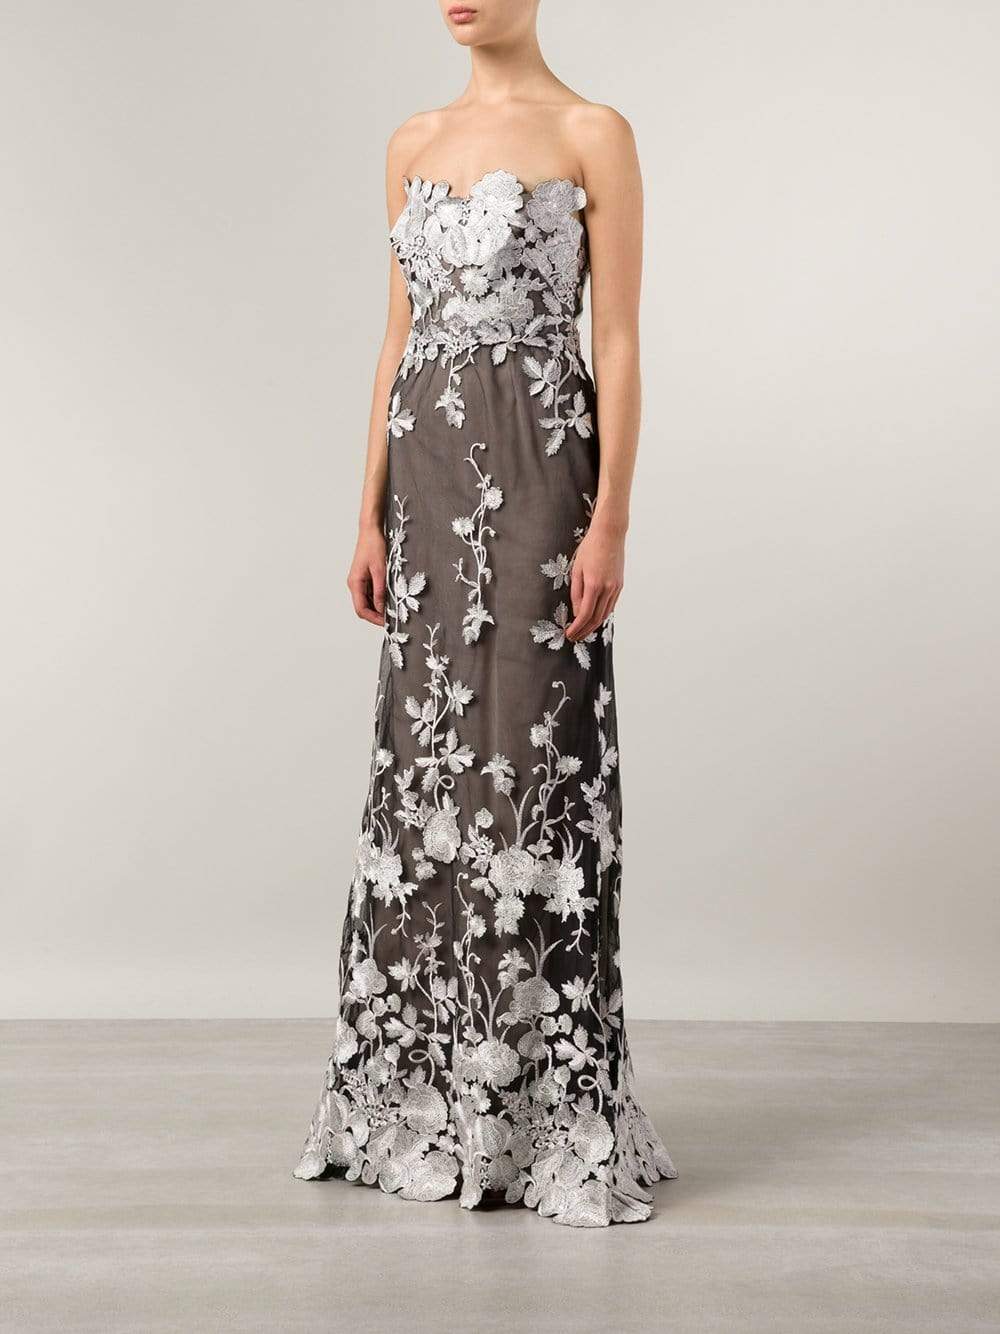 MARCHESA NOTTE-Embellished Floral Tulle Gown-